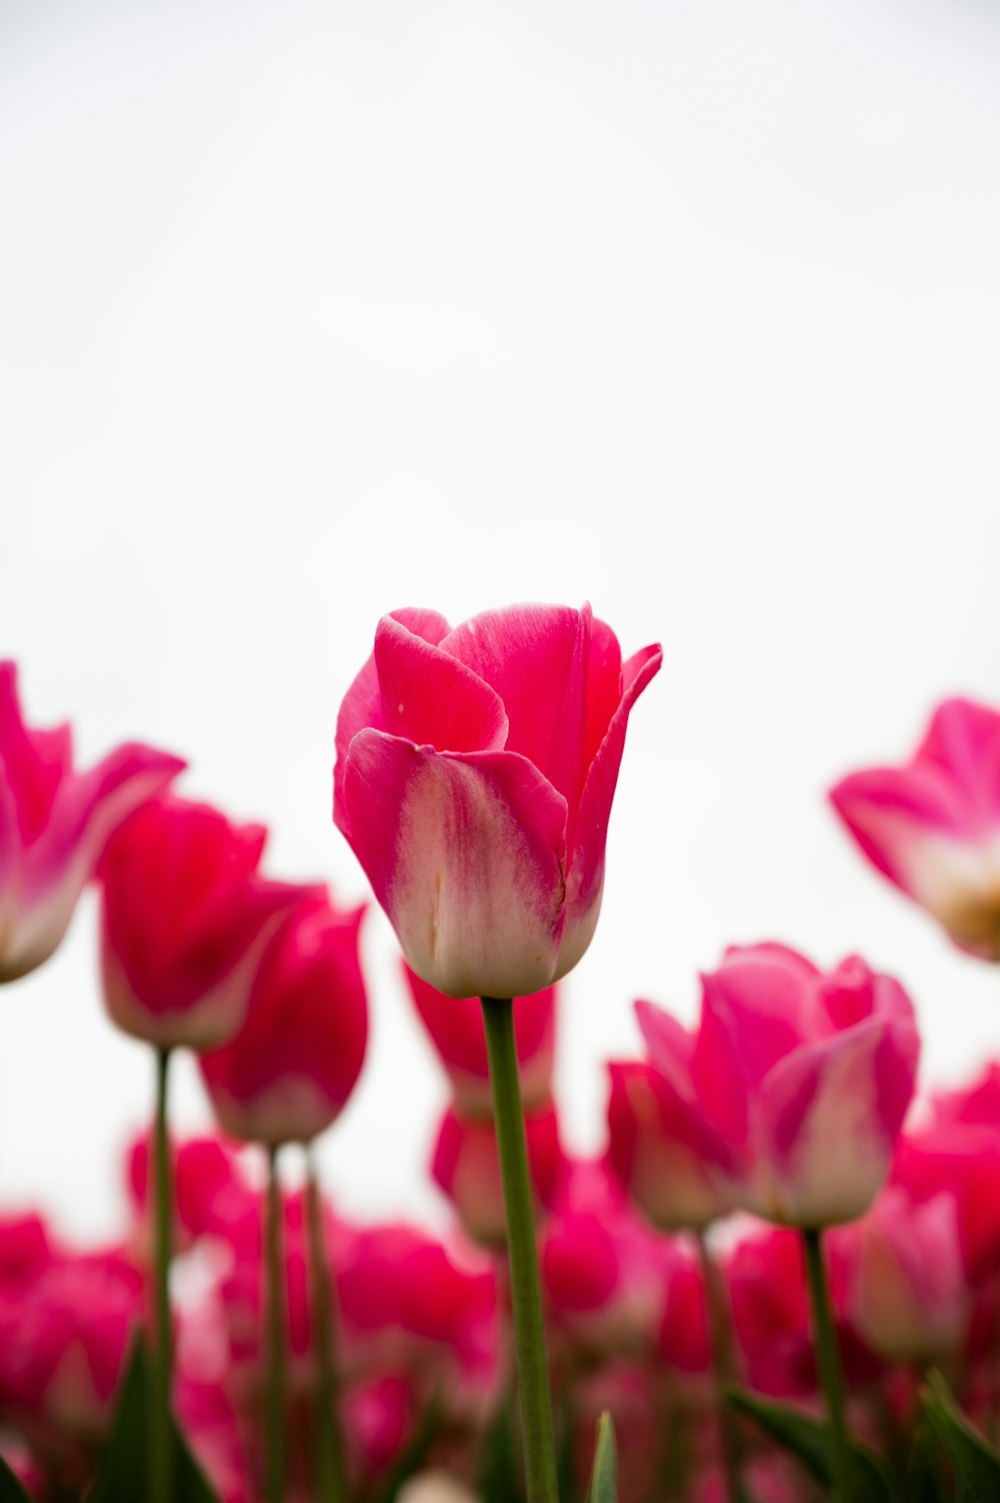 a group of pink and white tulips in a field